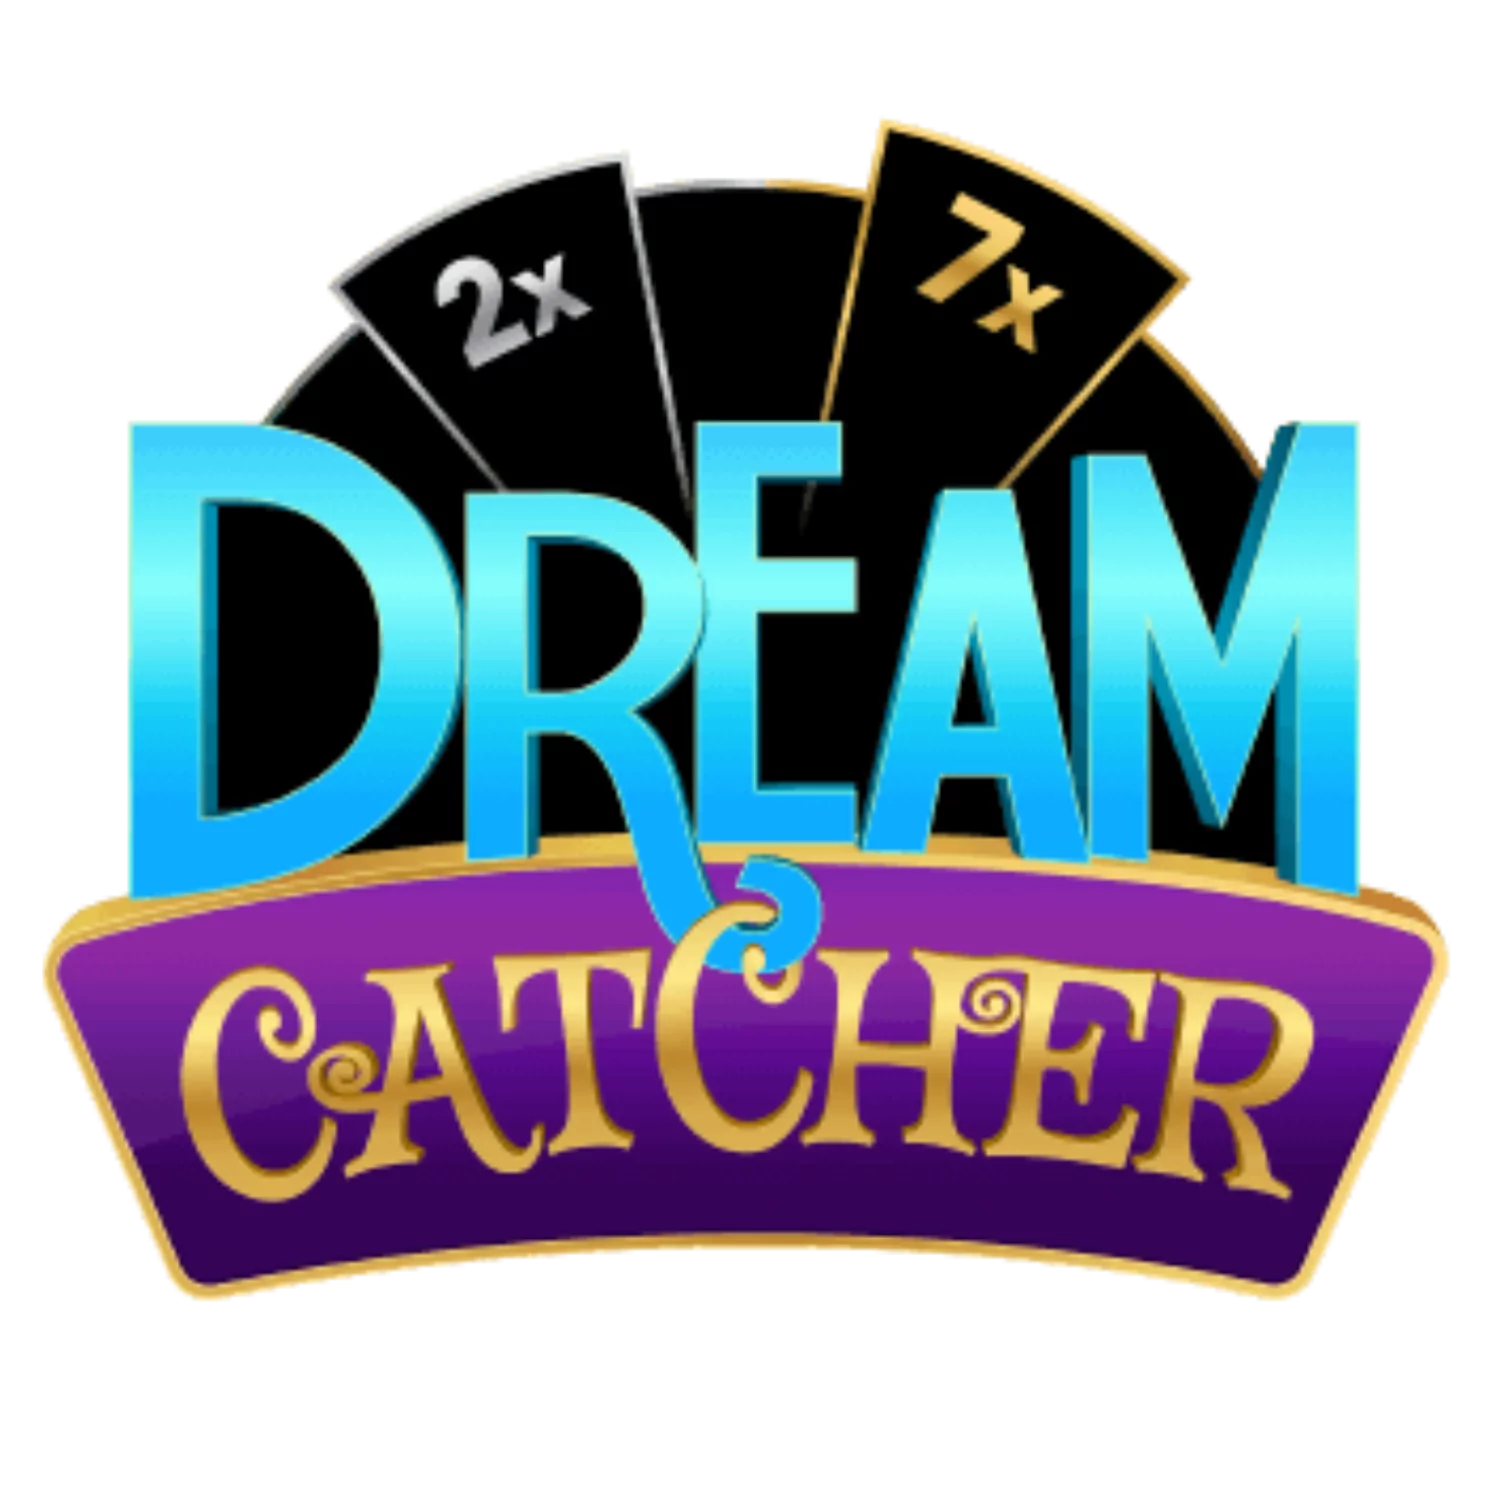 Register at an online casino and play Dream Catcher live,